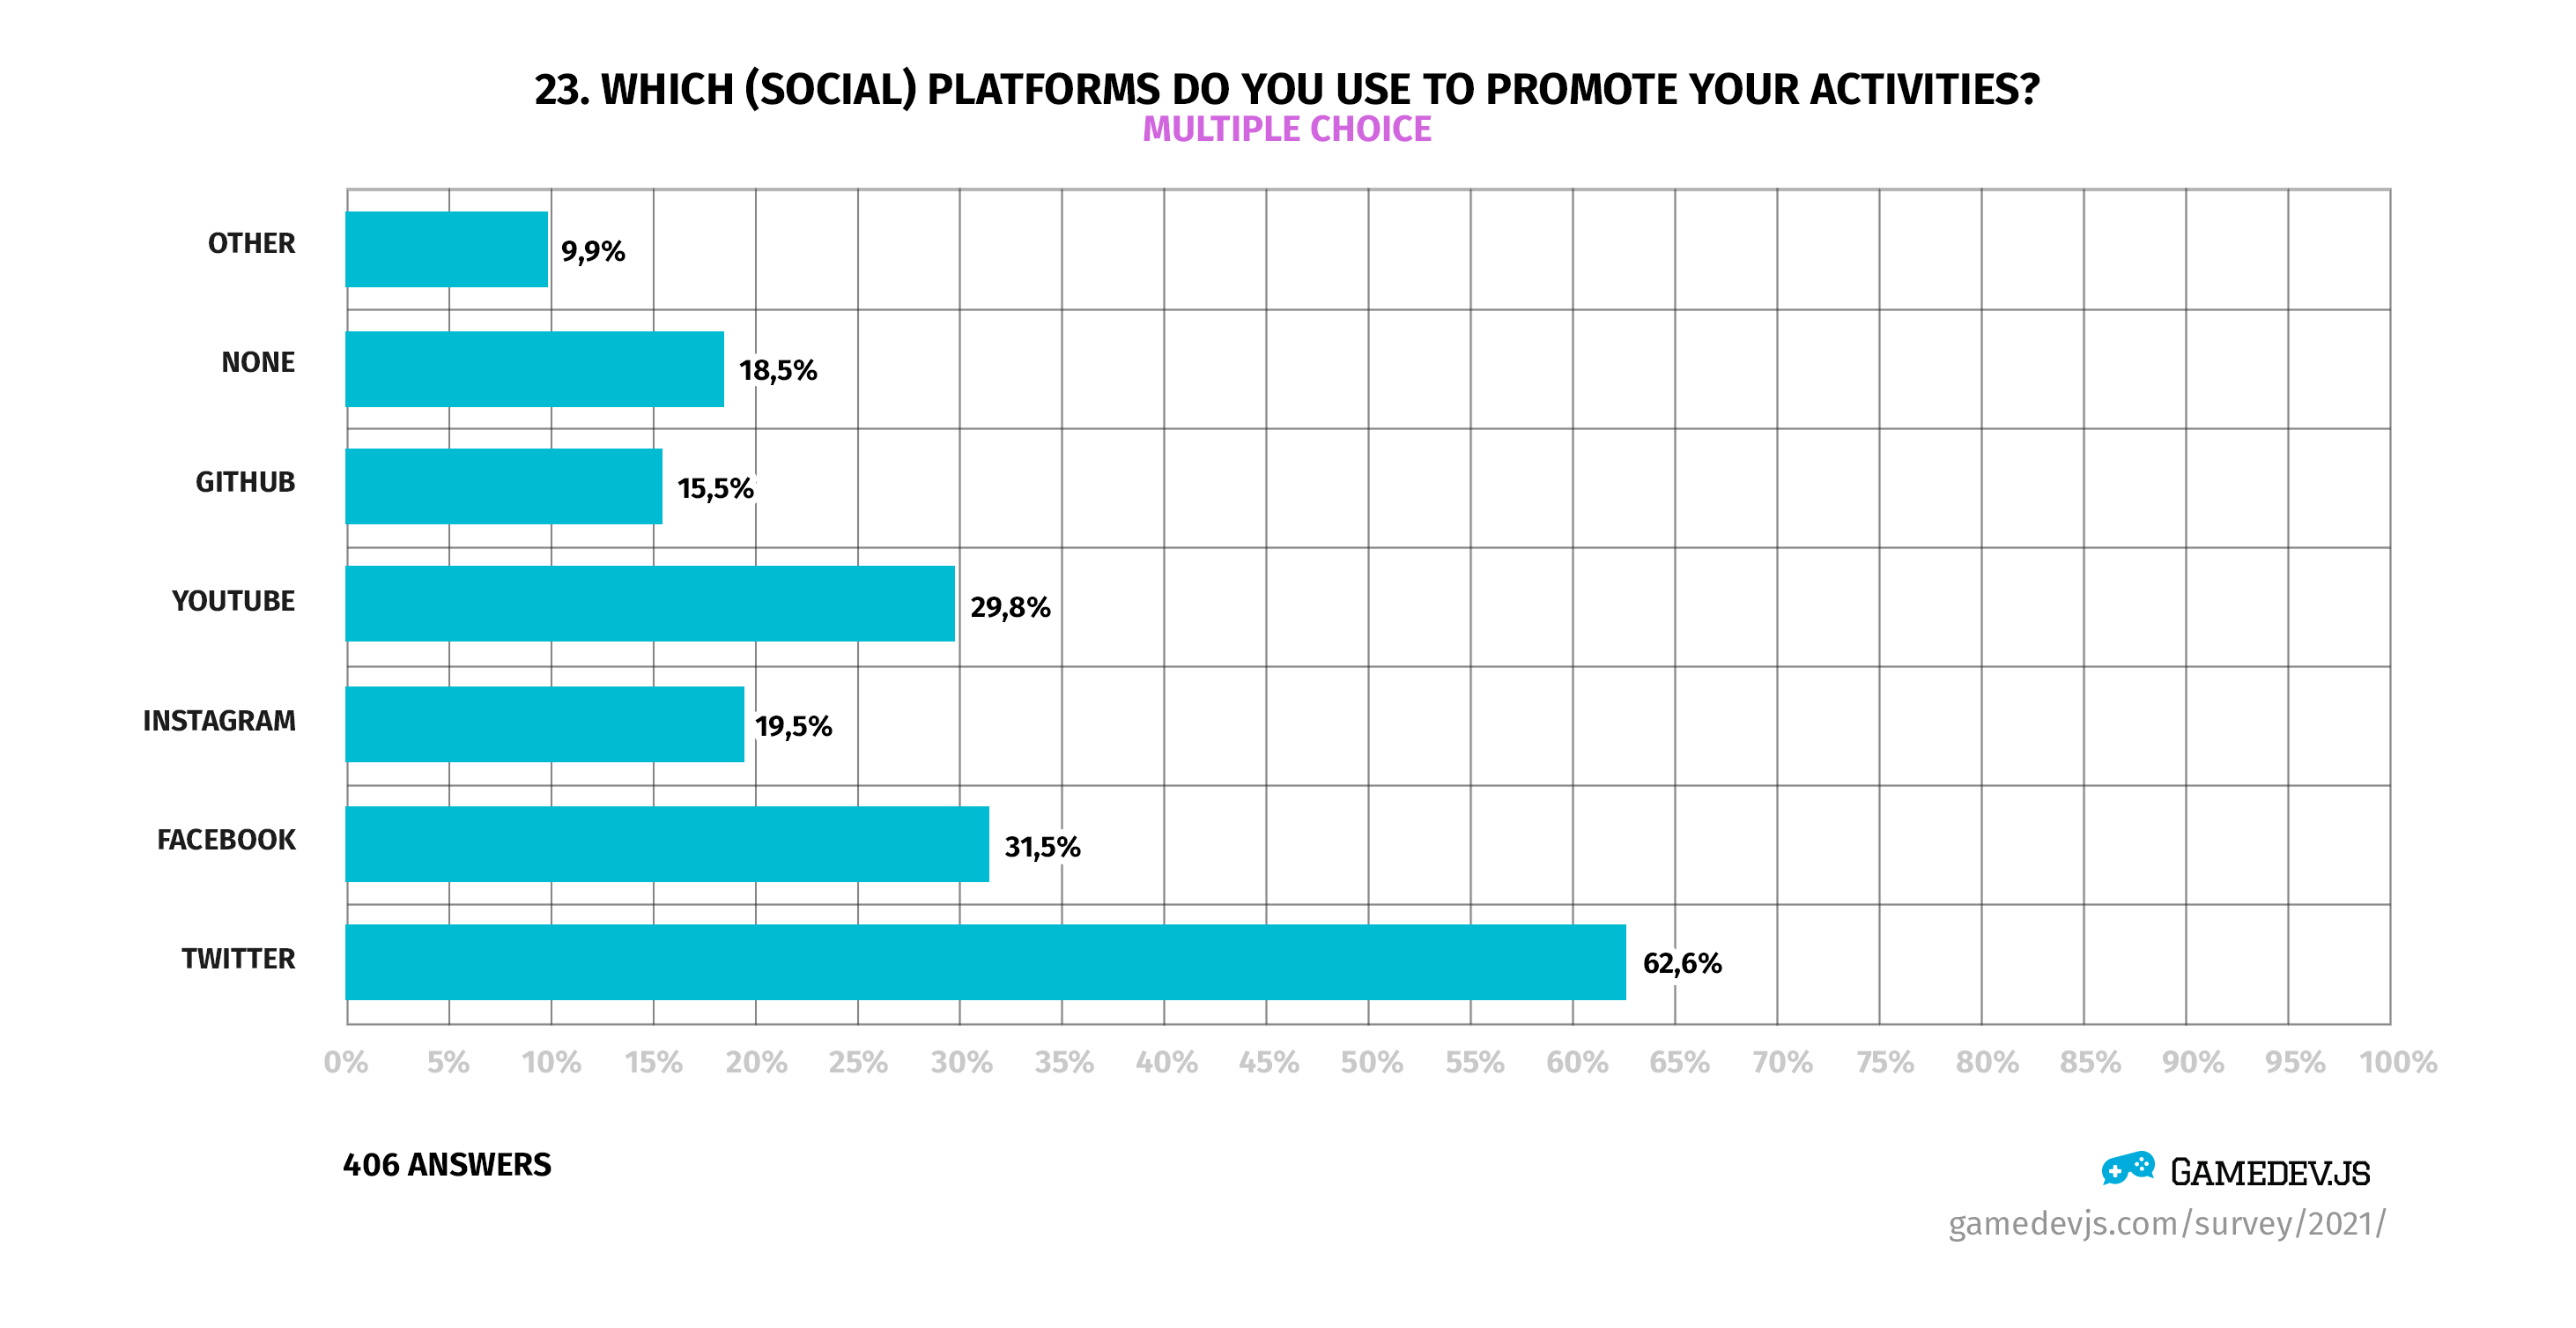 Gamedev.js Survey 2021 - Question #23: Which (social) platforms do you use to promote your activities?